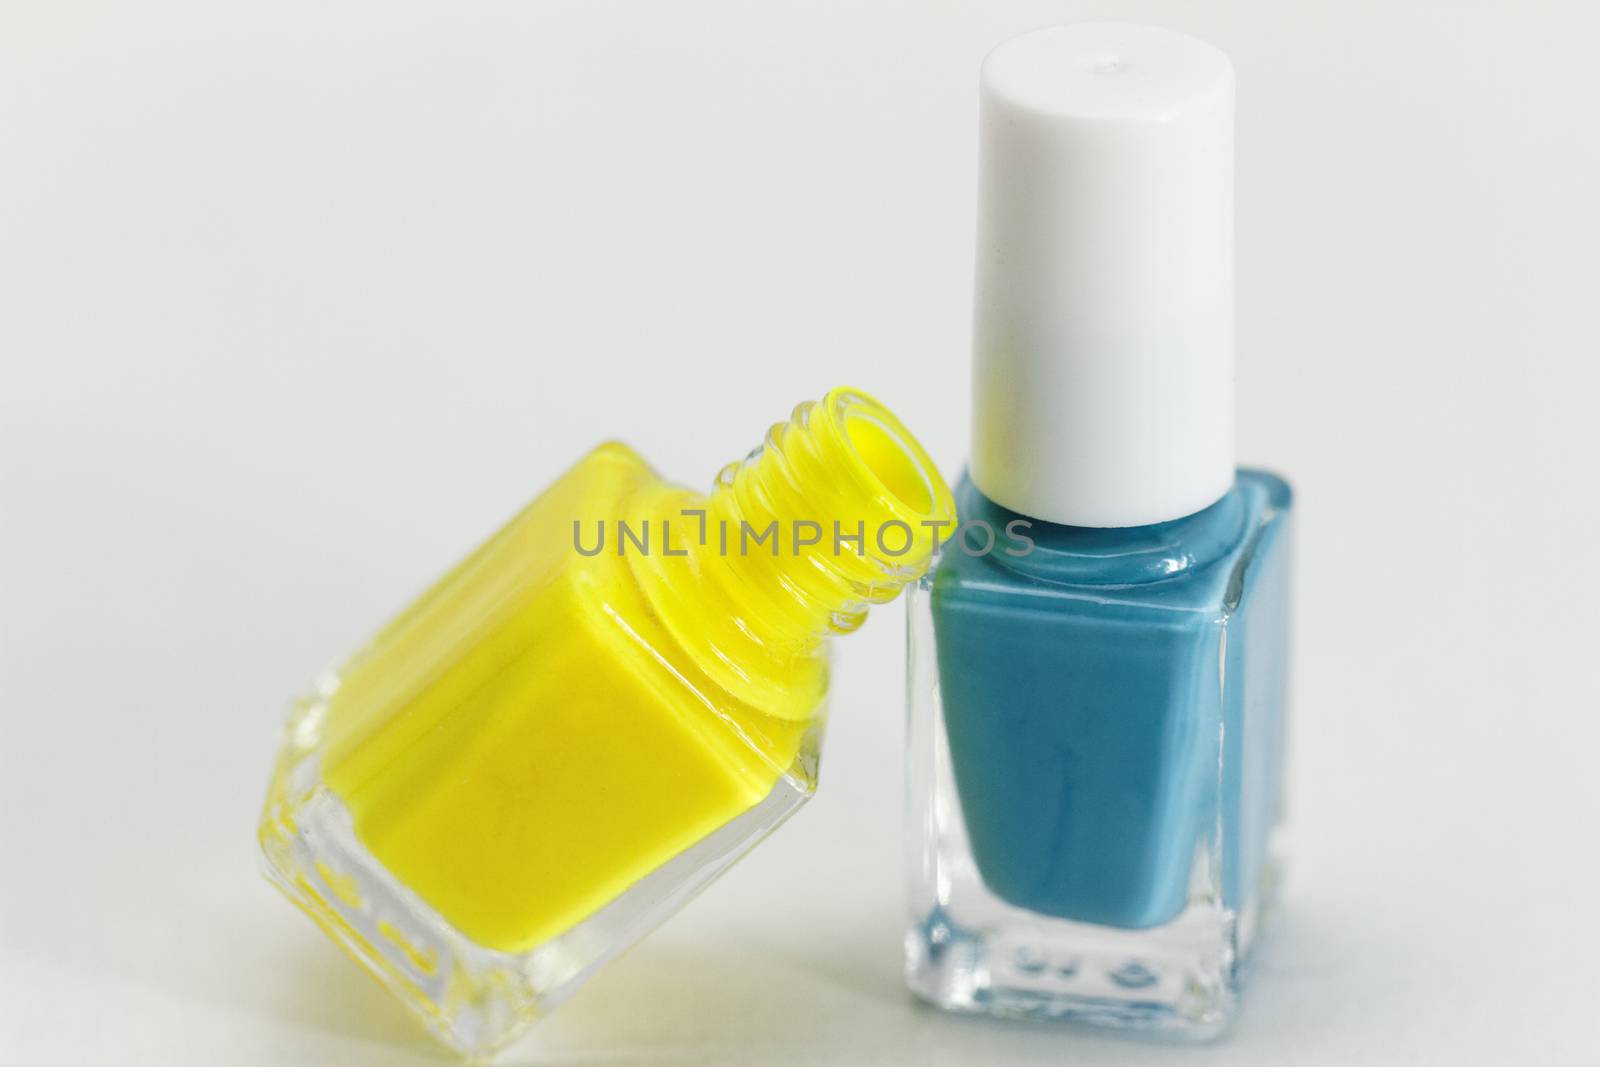 Colorful nail polish - white background, yellow and blue style